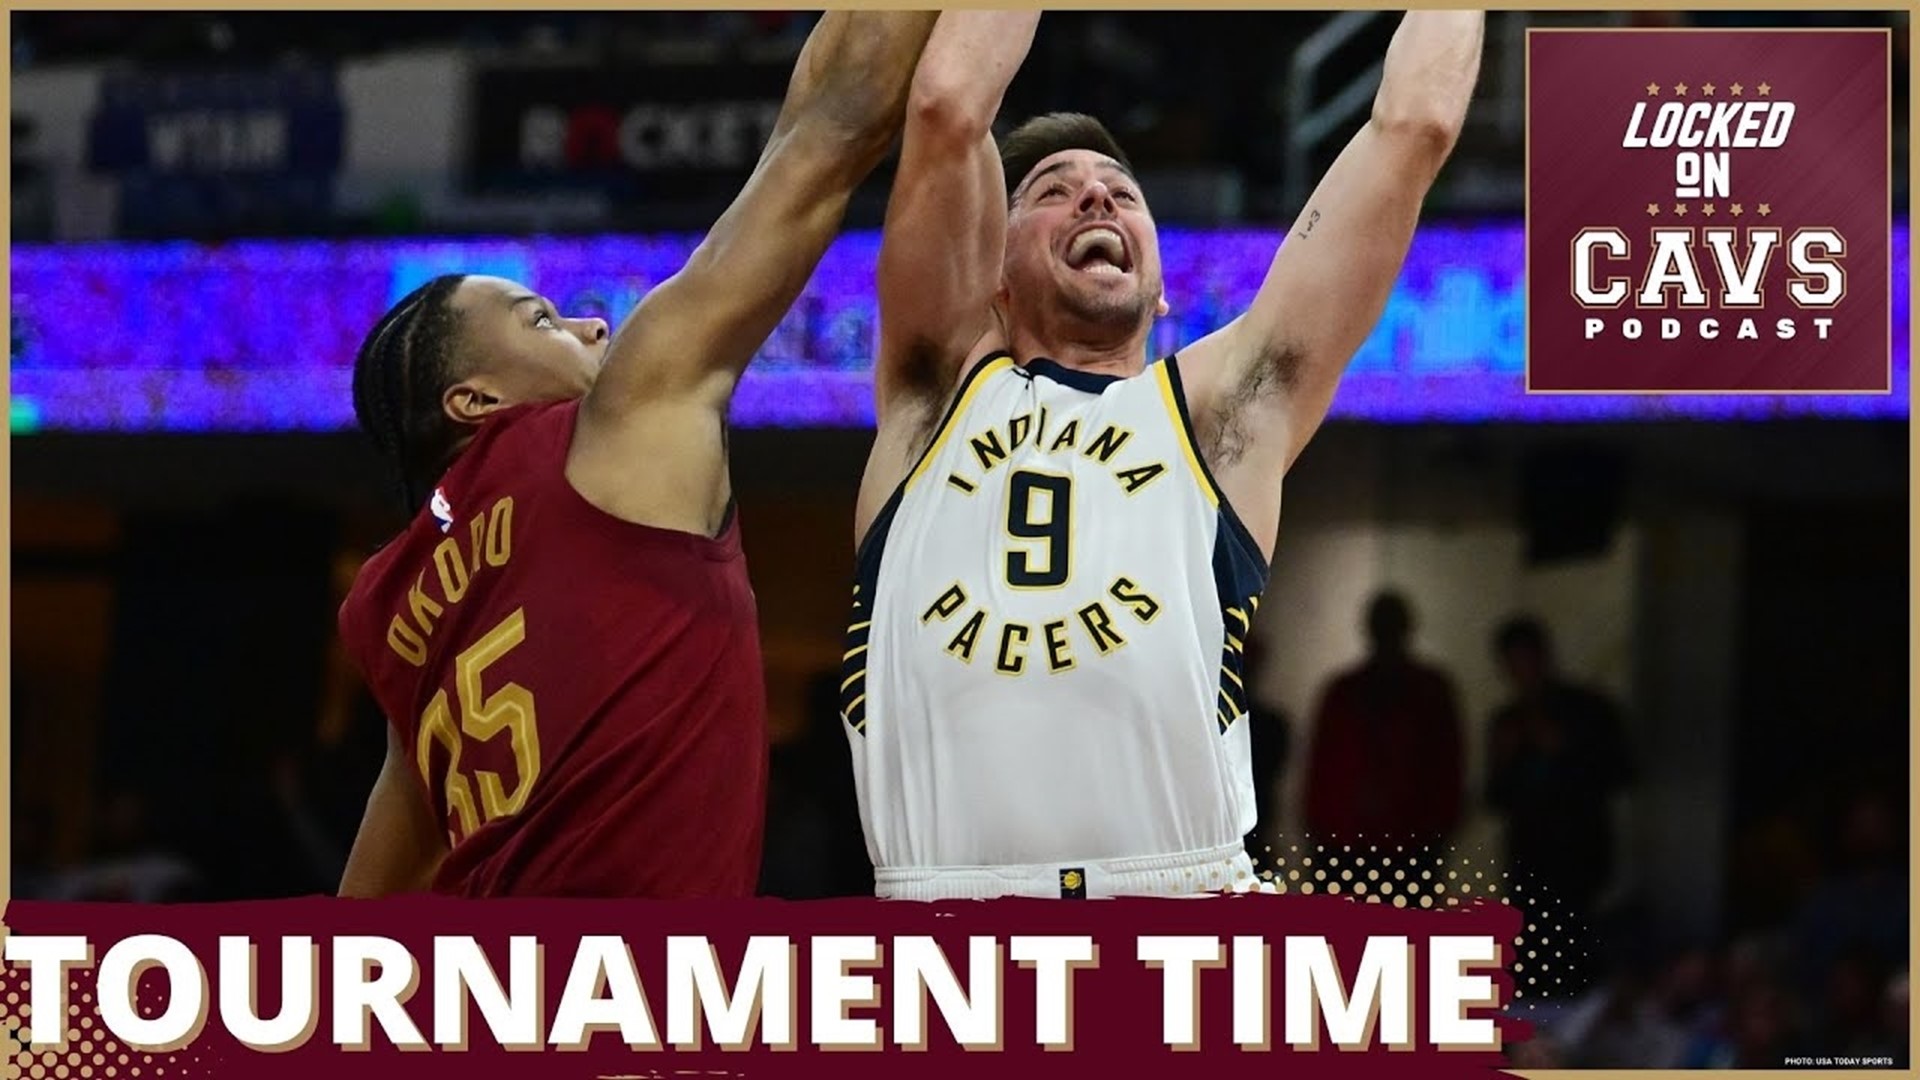 Host Chris Manning talks to Locked On Pacers host Tony East about the in-season tournament, the previous Cavs-Pacers game and what to watch for on the court.